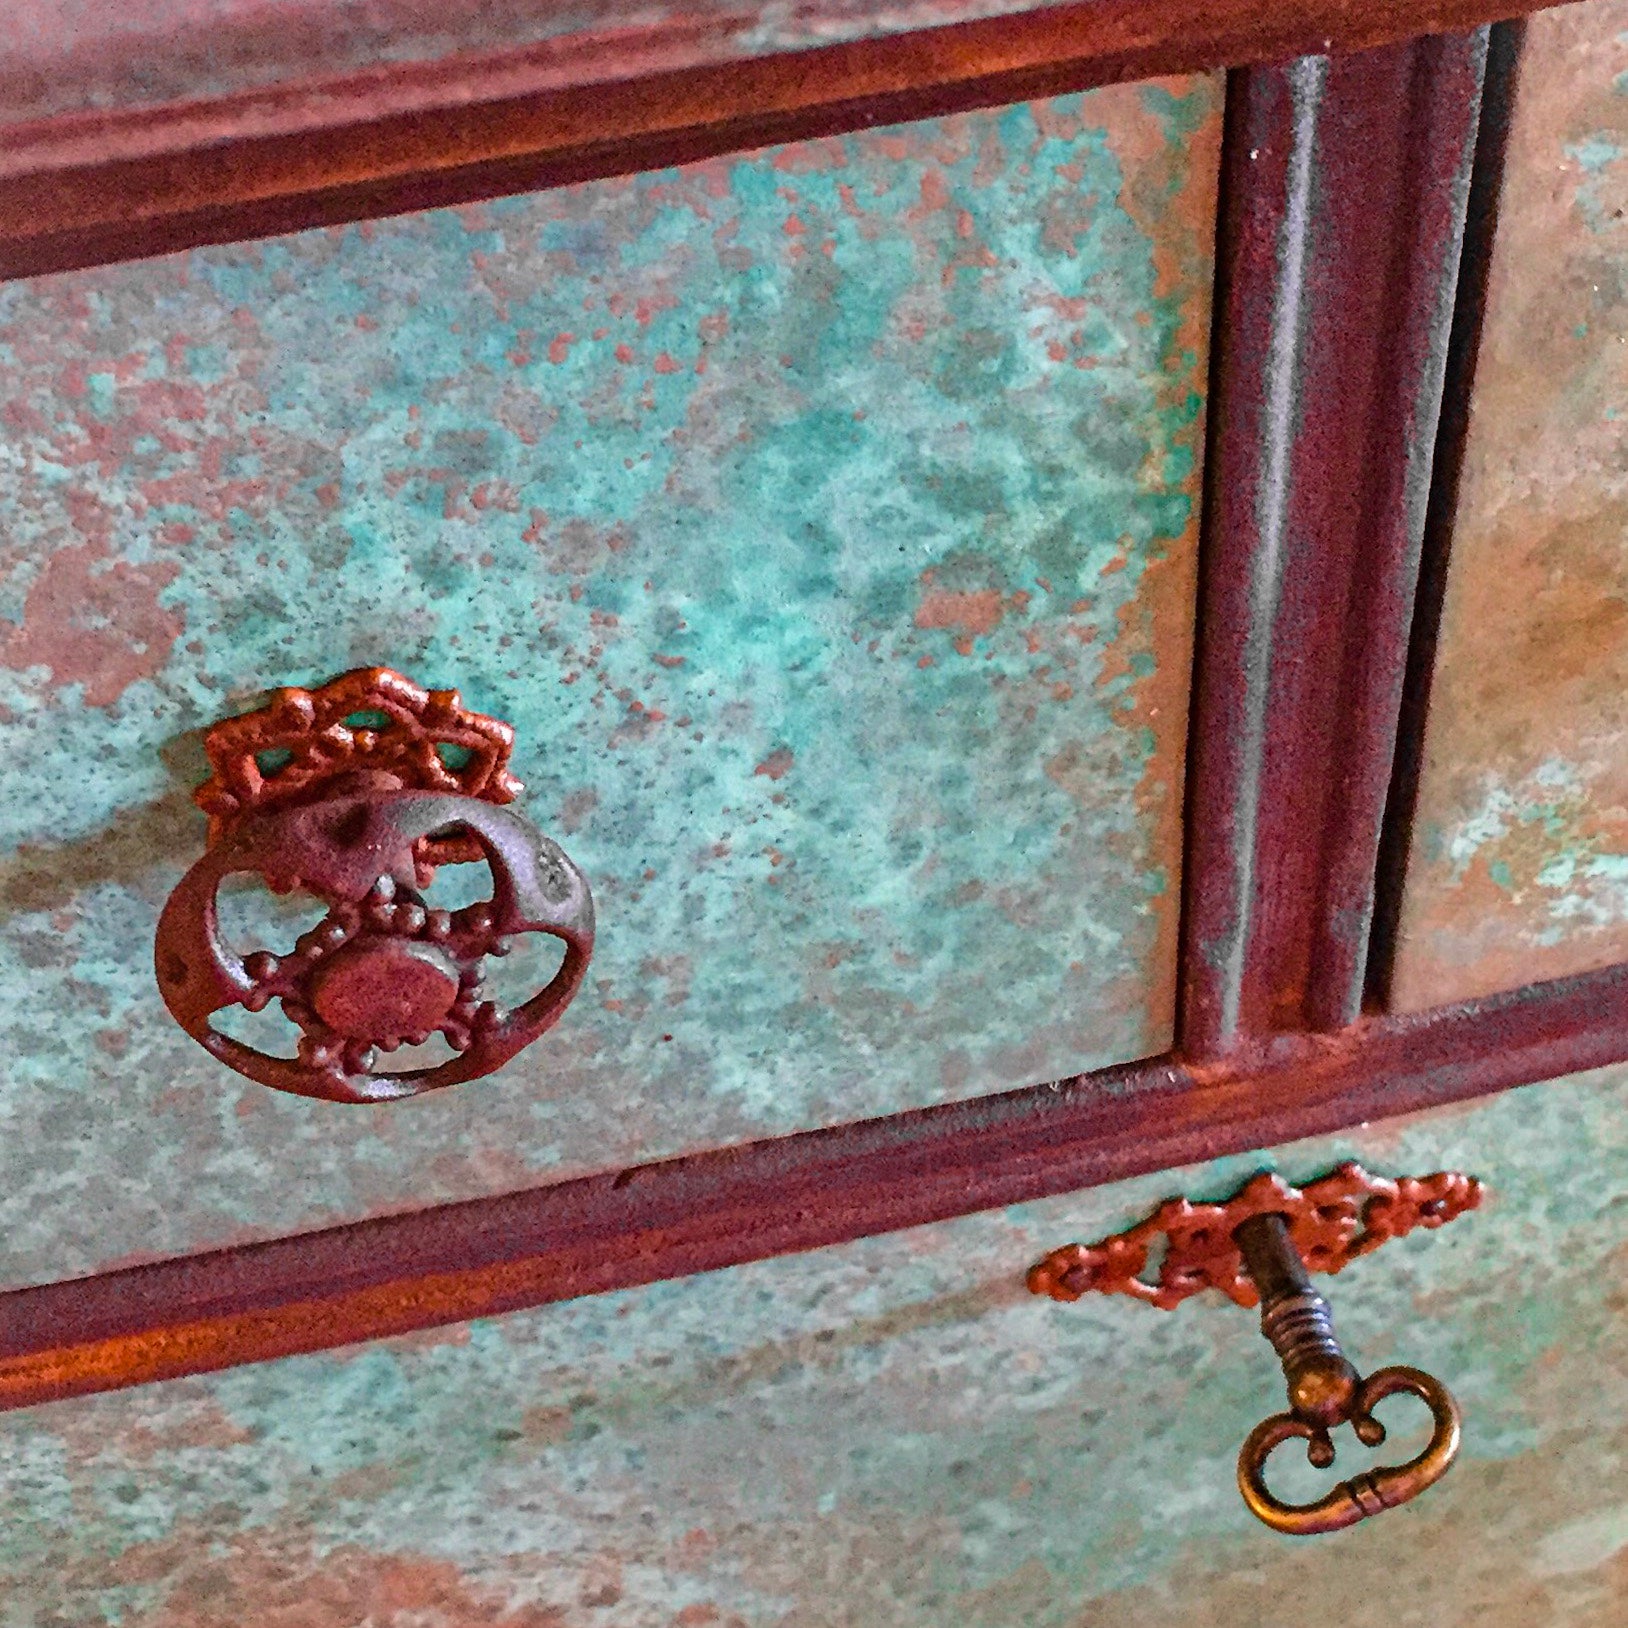 A close up of the drawer pull on an antique dresser with a working skeleton key, done in a boho style, patina finish.